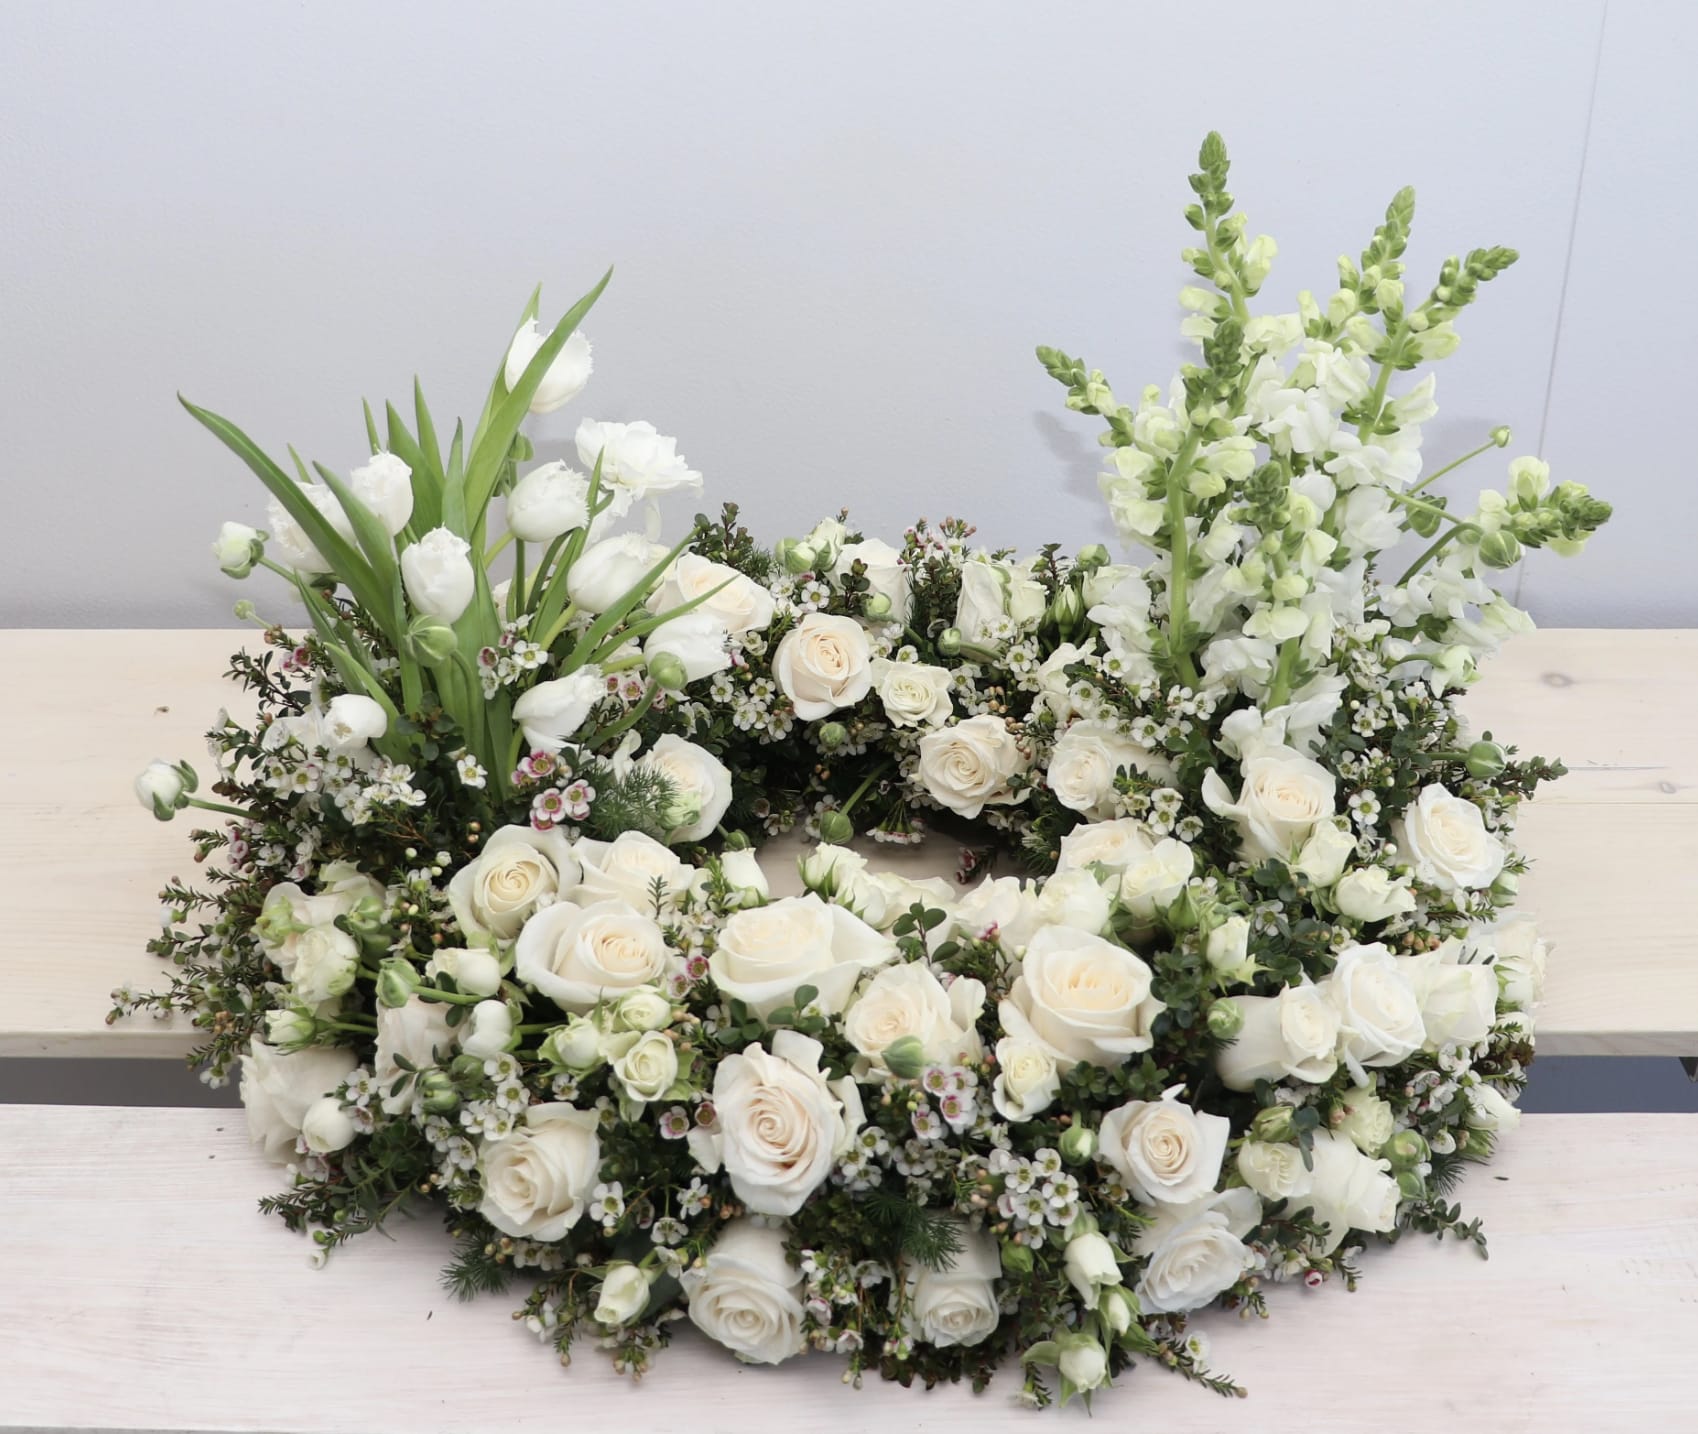 Urn Wreath in Whites  - This urn tribute wreath includes a mix of flowers, roses, and seasonal greens. In the special instruction let us know what colors you would like. Standard size is 30'', deluxe is 36'' and premium is 42''. Interior diameter is about 10'' for standard size.